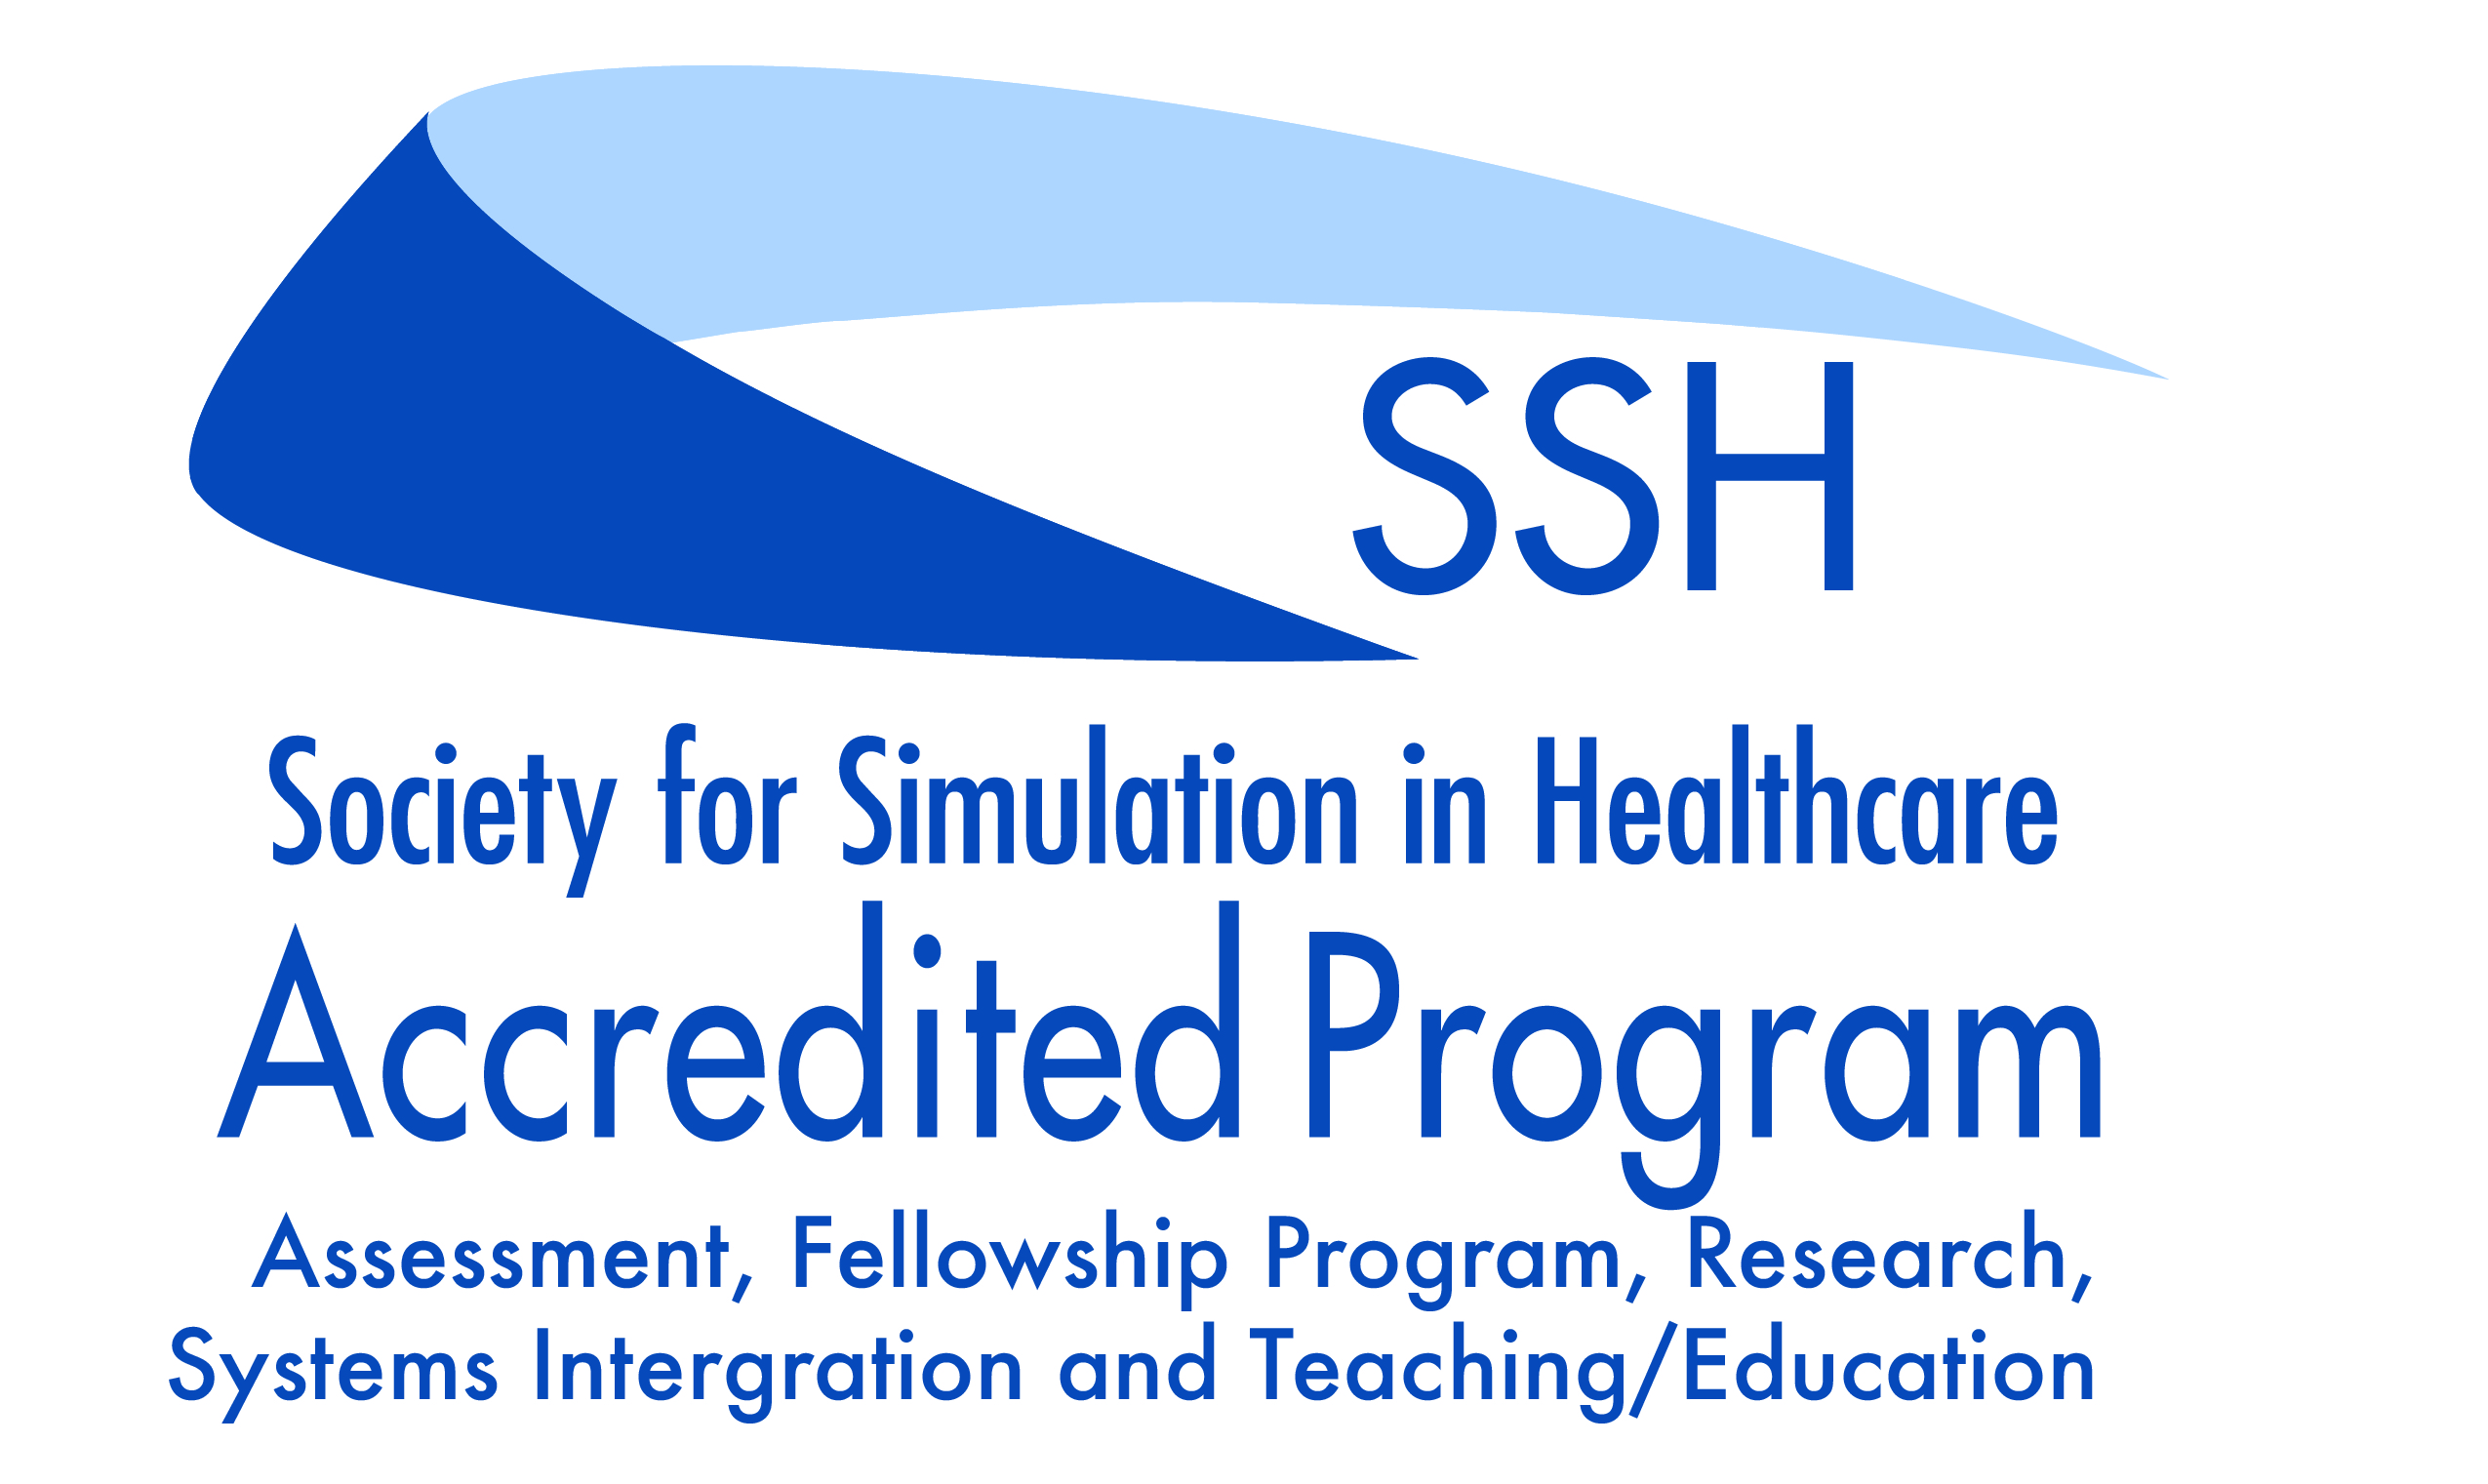 The Society for Simulation in Healthcare (SSH) 